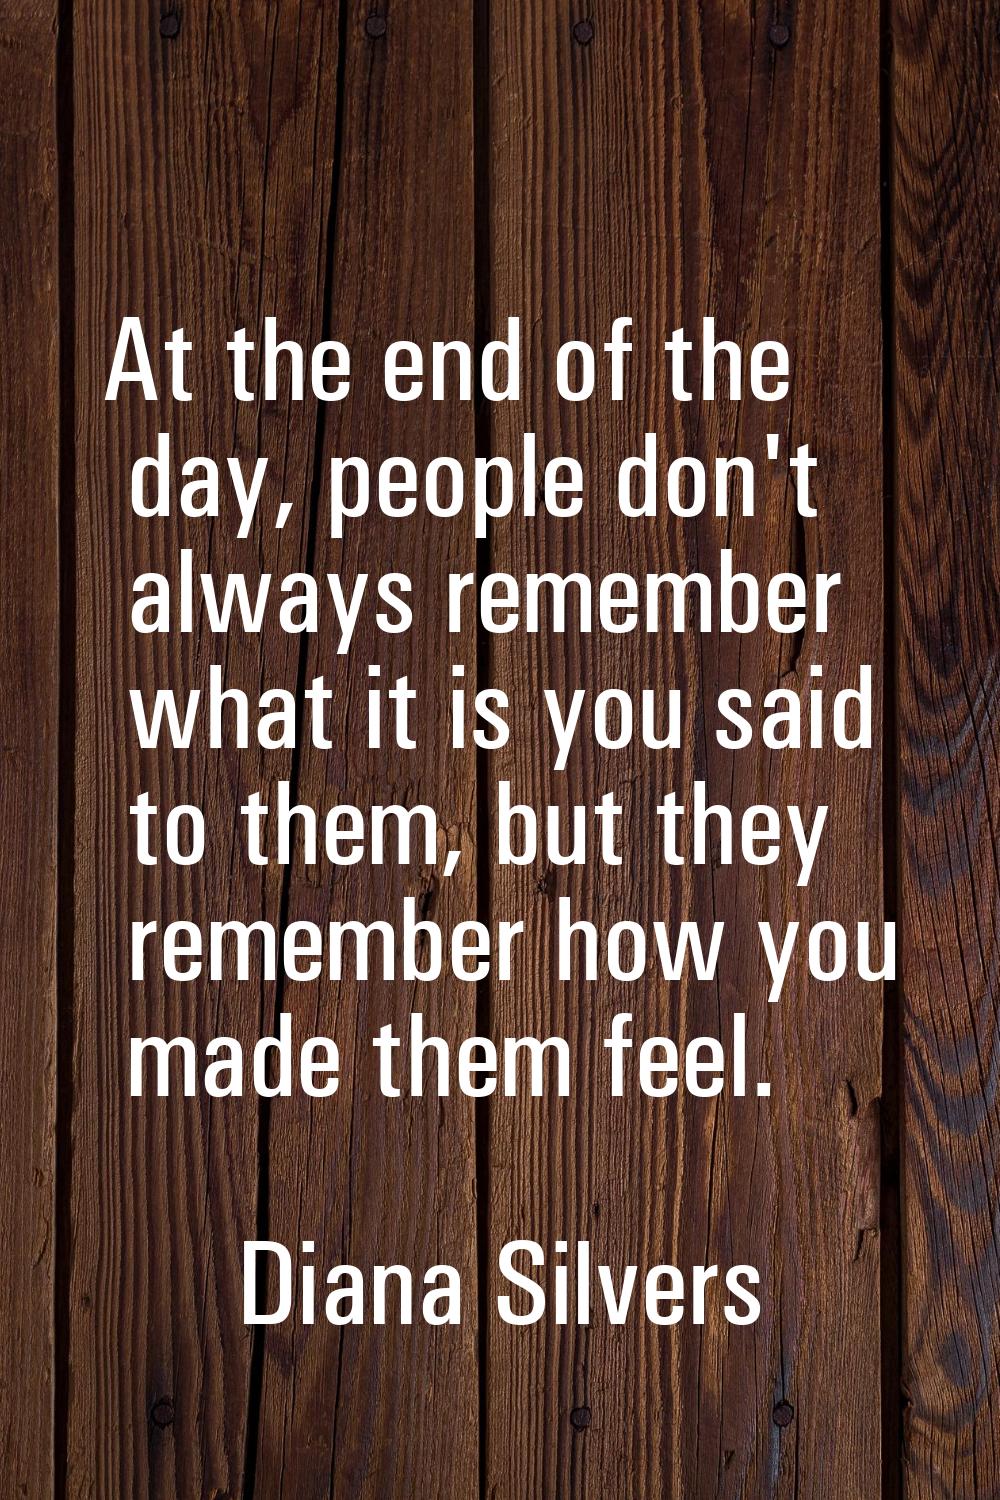 At the end of the day, people don't always remember what it is you said to them, but they remember 